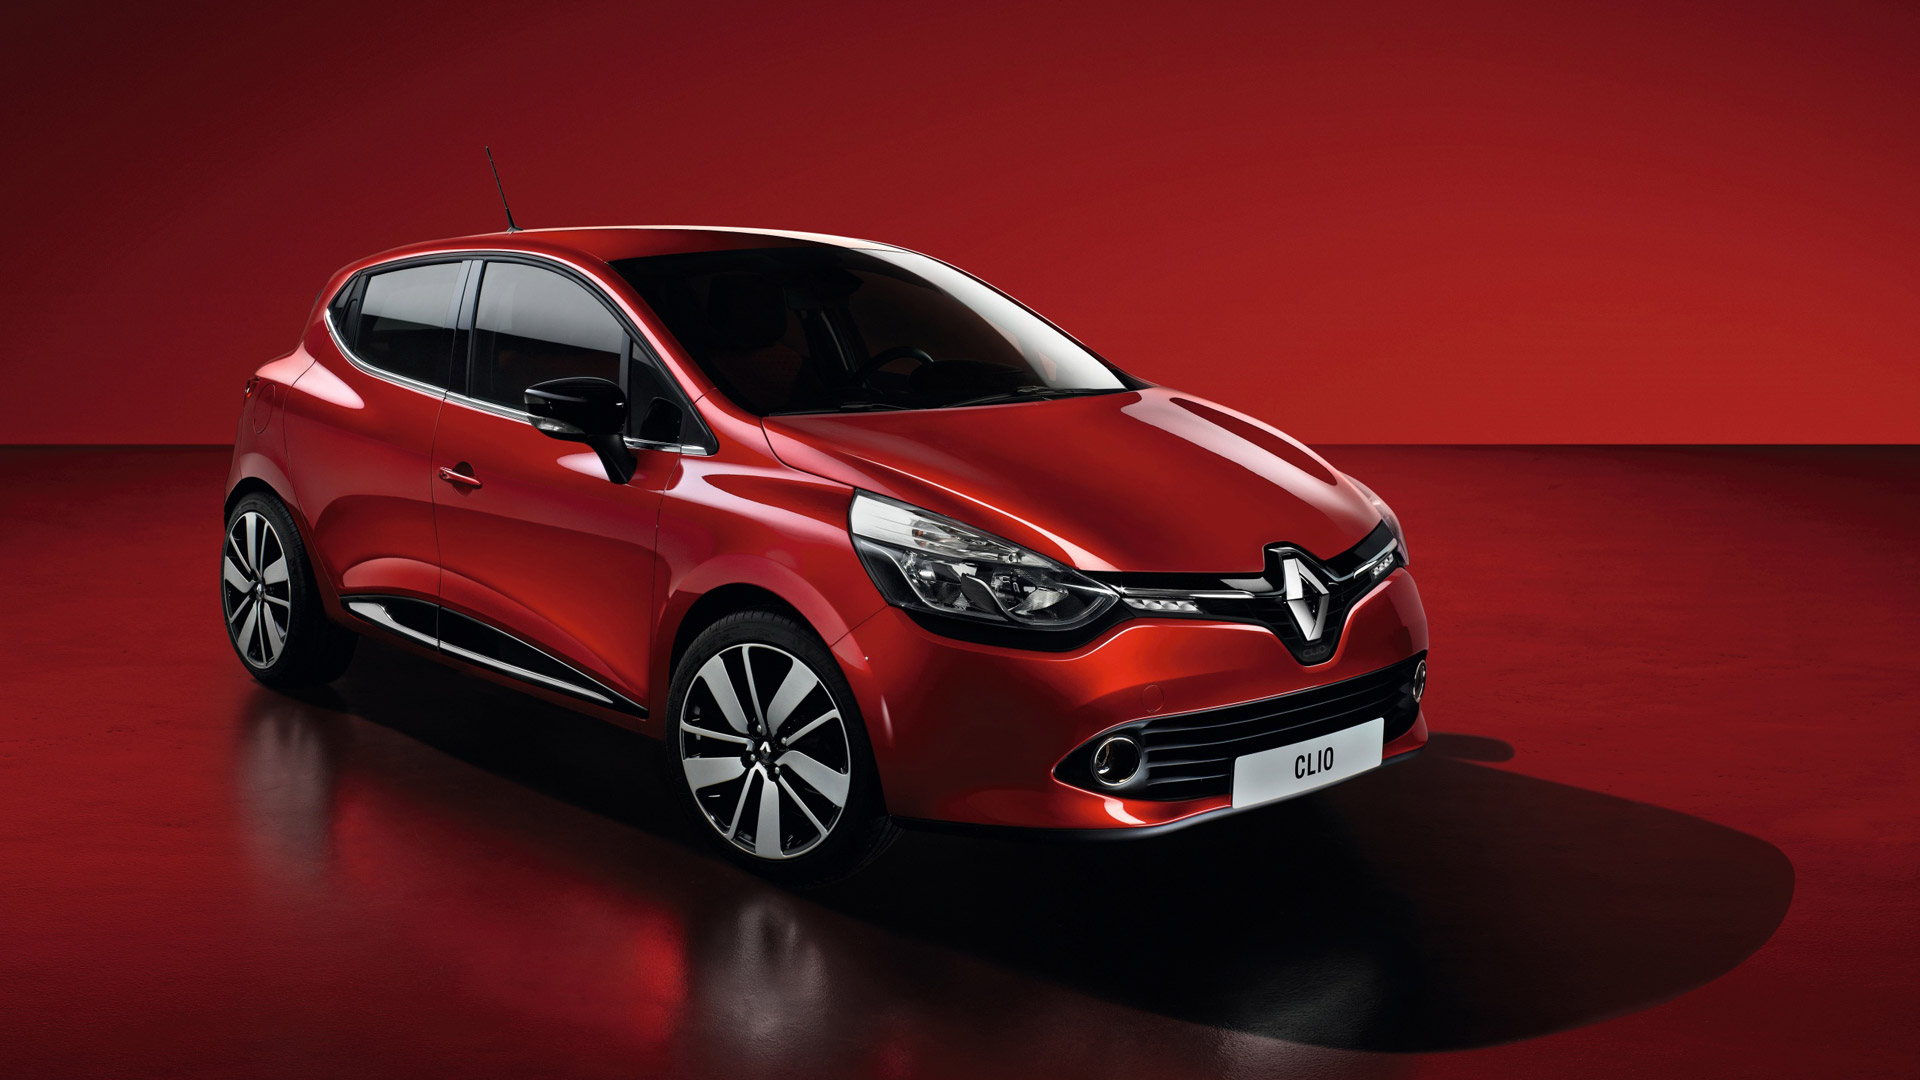 Coches fiables: Renault Clio